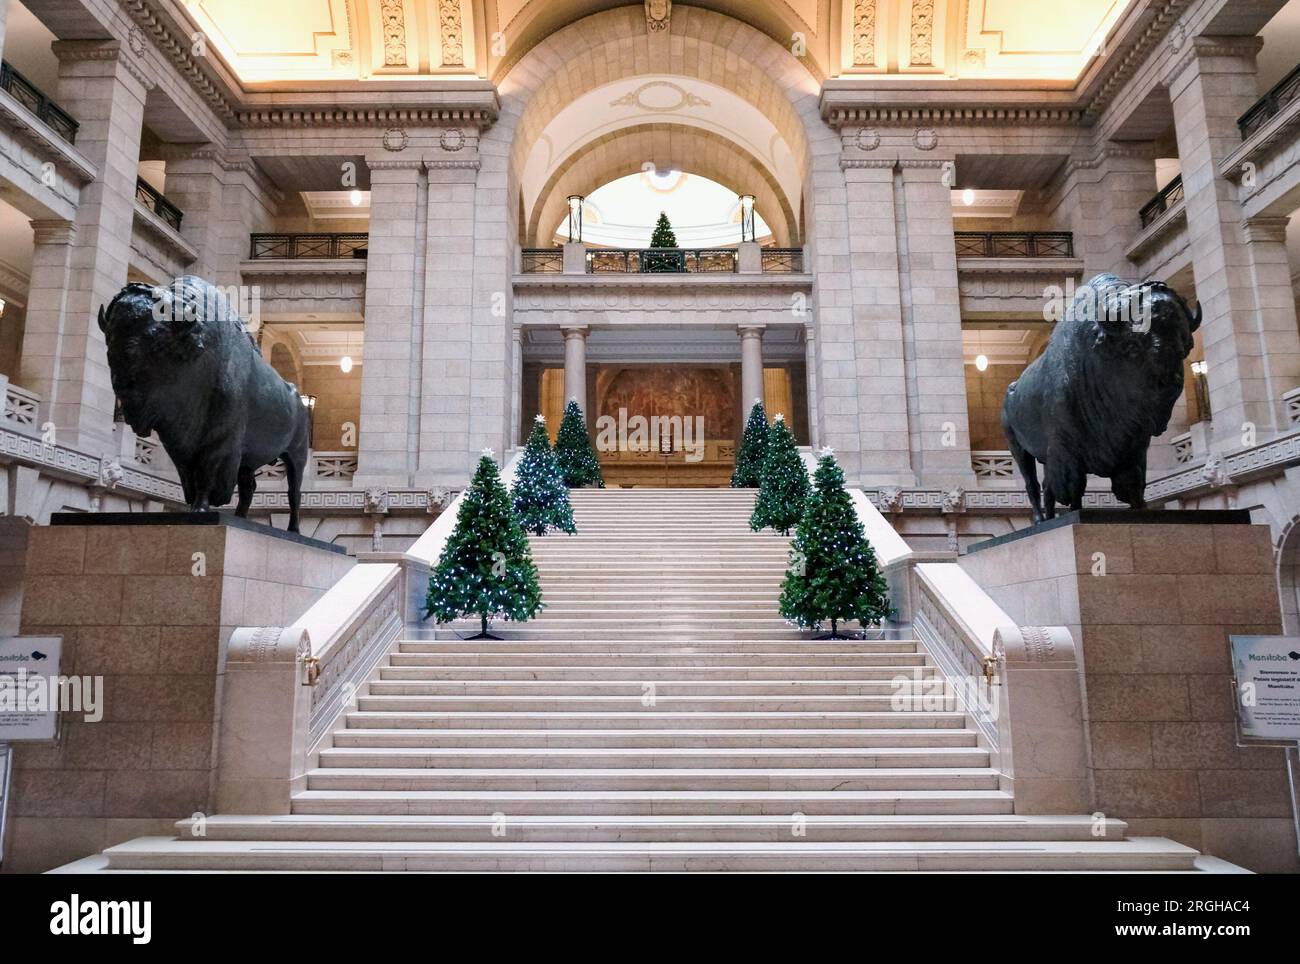 Part of the interior of Manitoba Legislature building with two life sized bison statues at the base of the Grand Staircase. The bison is an important Stock Photo